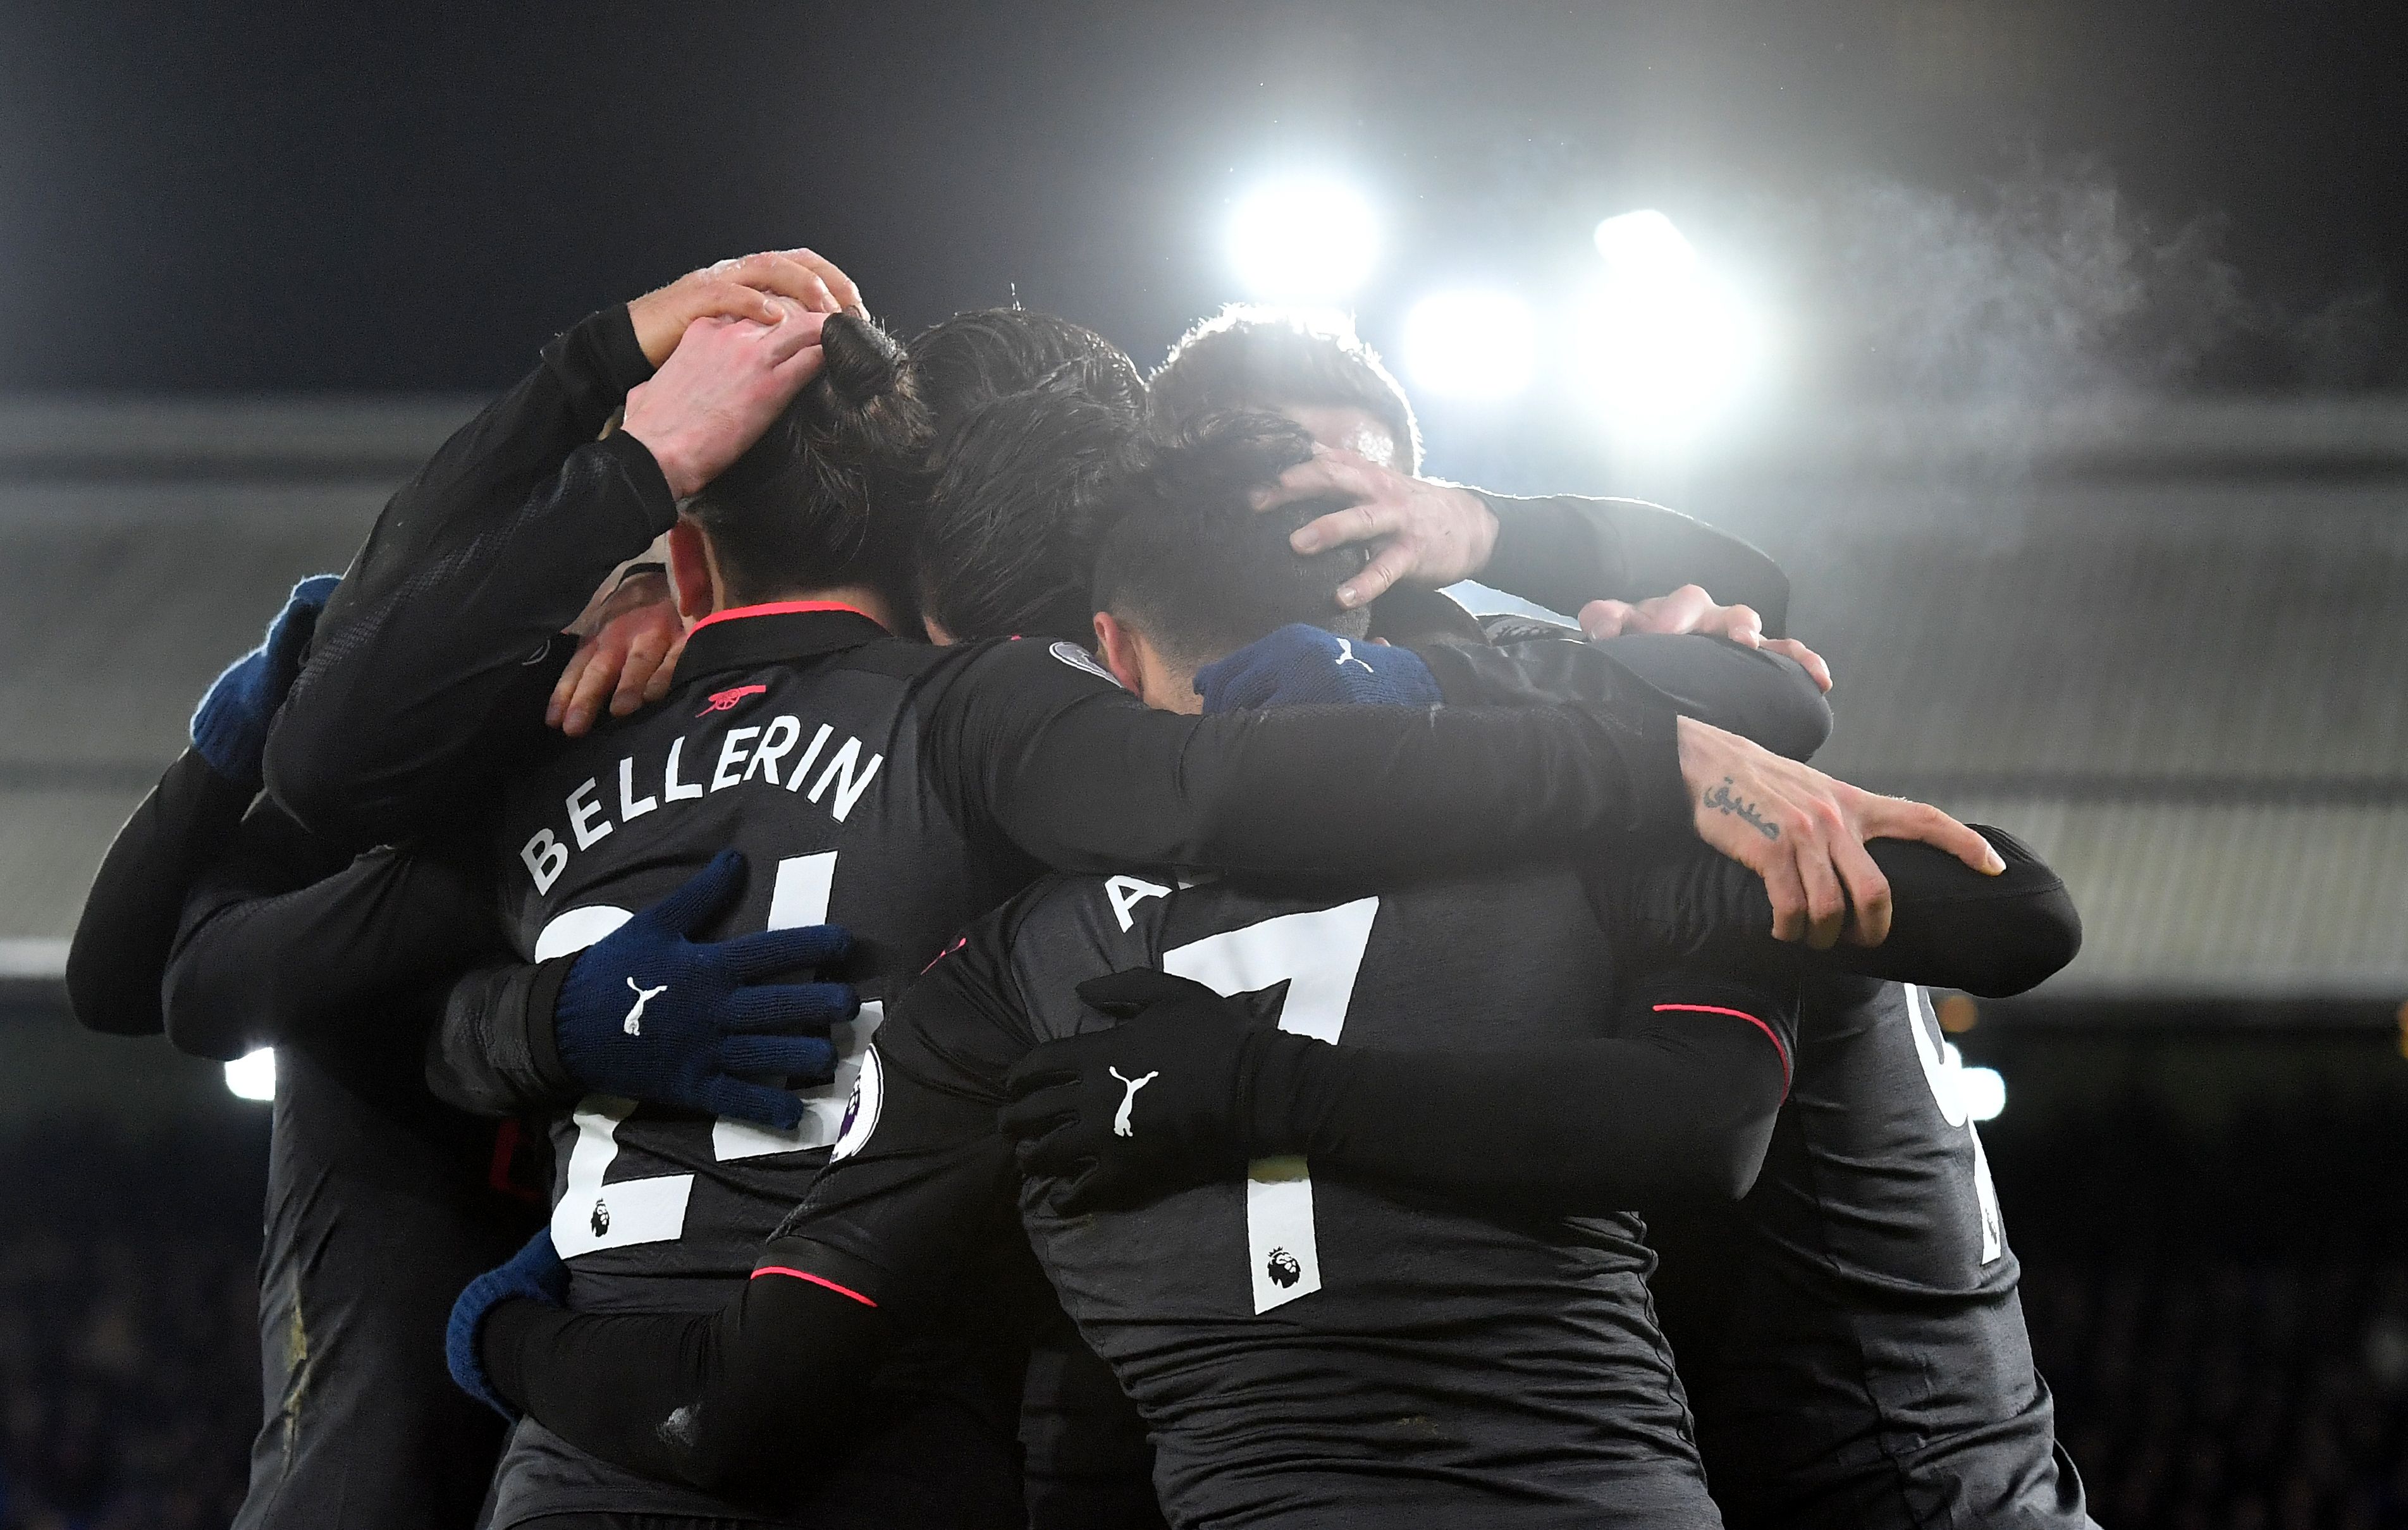 Arsenal's Chilean striker Alexis Sanchez celebrates after scoring their third goal with teammates during the English Premier League football match between Crystal Palace and Arsenal at Selhurst Park in south London on December 28, 2017. / AFP PHOTO / Ben STANSALL / RESTRICTED TO EDITORIAL USE. No use with unauthorized audio, video, data, fixture lists, club/league logos or 'live' services. Online in-match use limited to 75 images, no video emulation. No use in betting, games or single club/league/player publications.  /         (Photo credit should read BEN STANSALL/AFP/Getty Images)